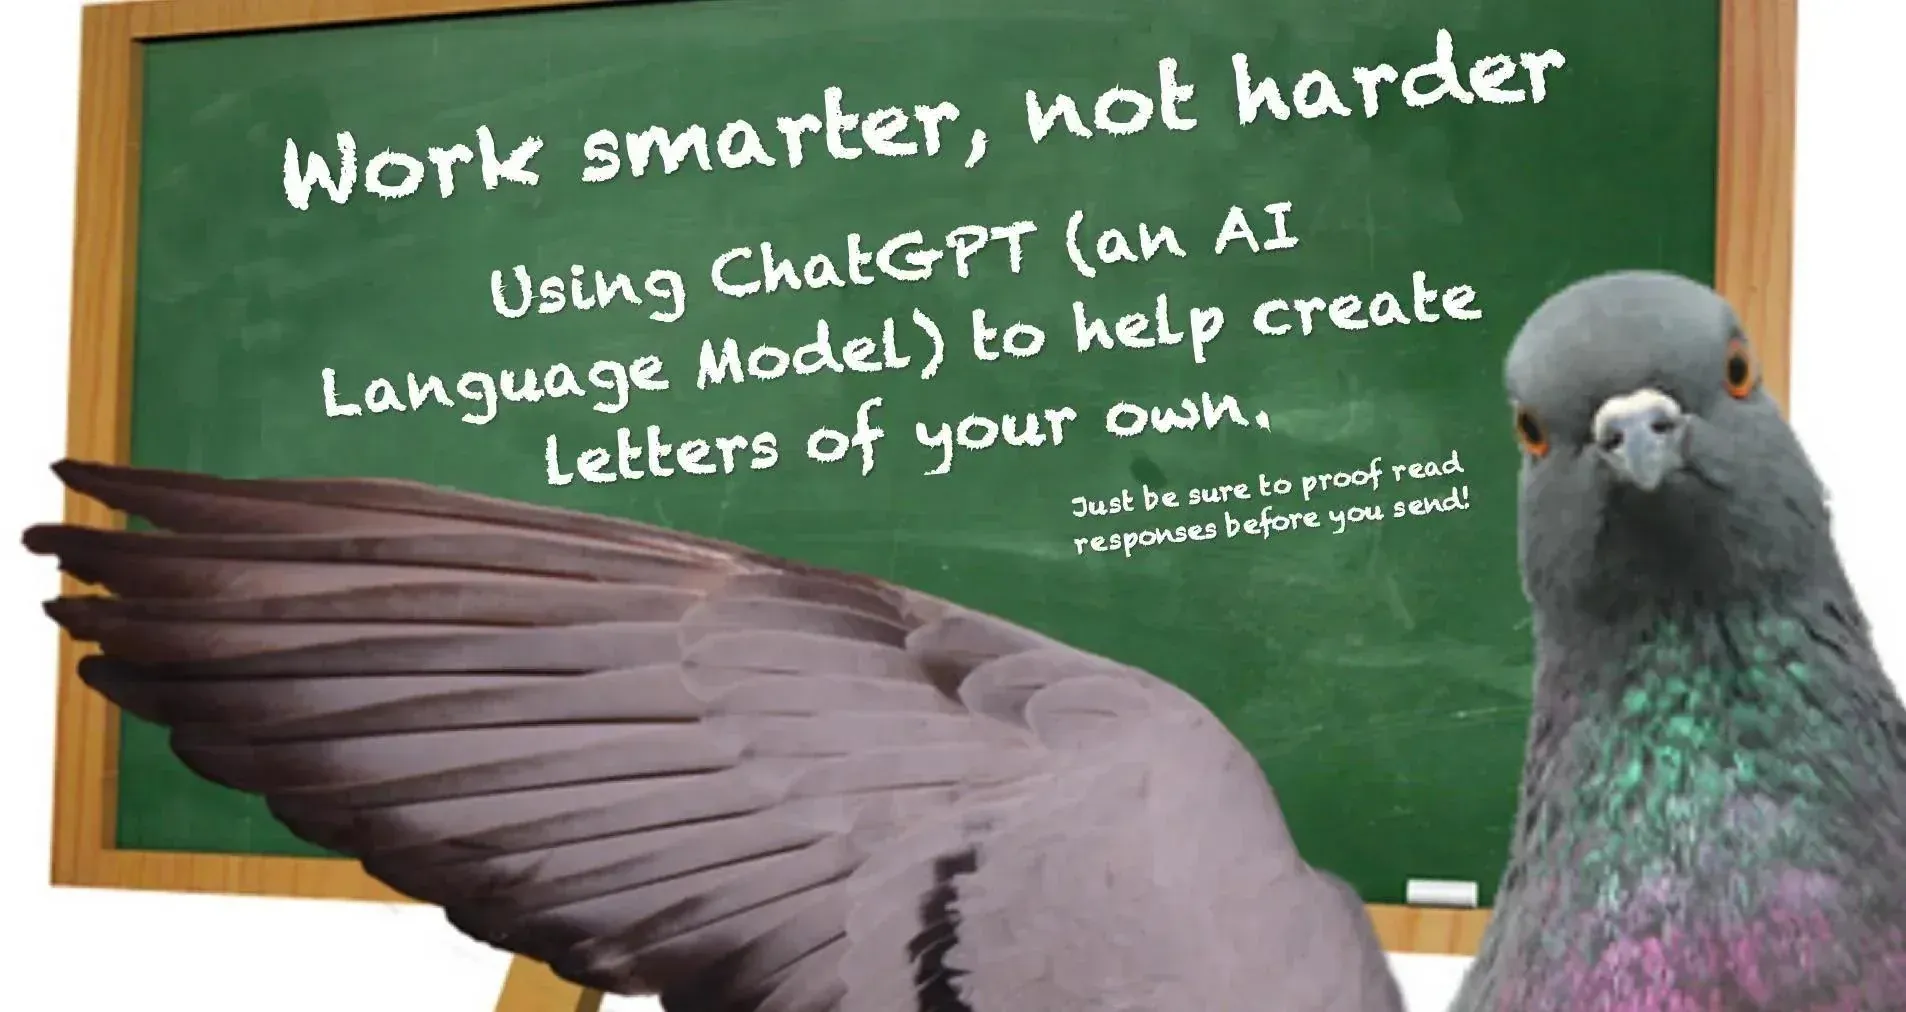 HEADER: WORK SMARTER, NOT HARDER - USING CHATGPT TO HELP CREATE LETTERS OF YOUR OWN